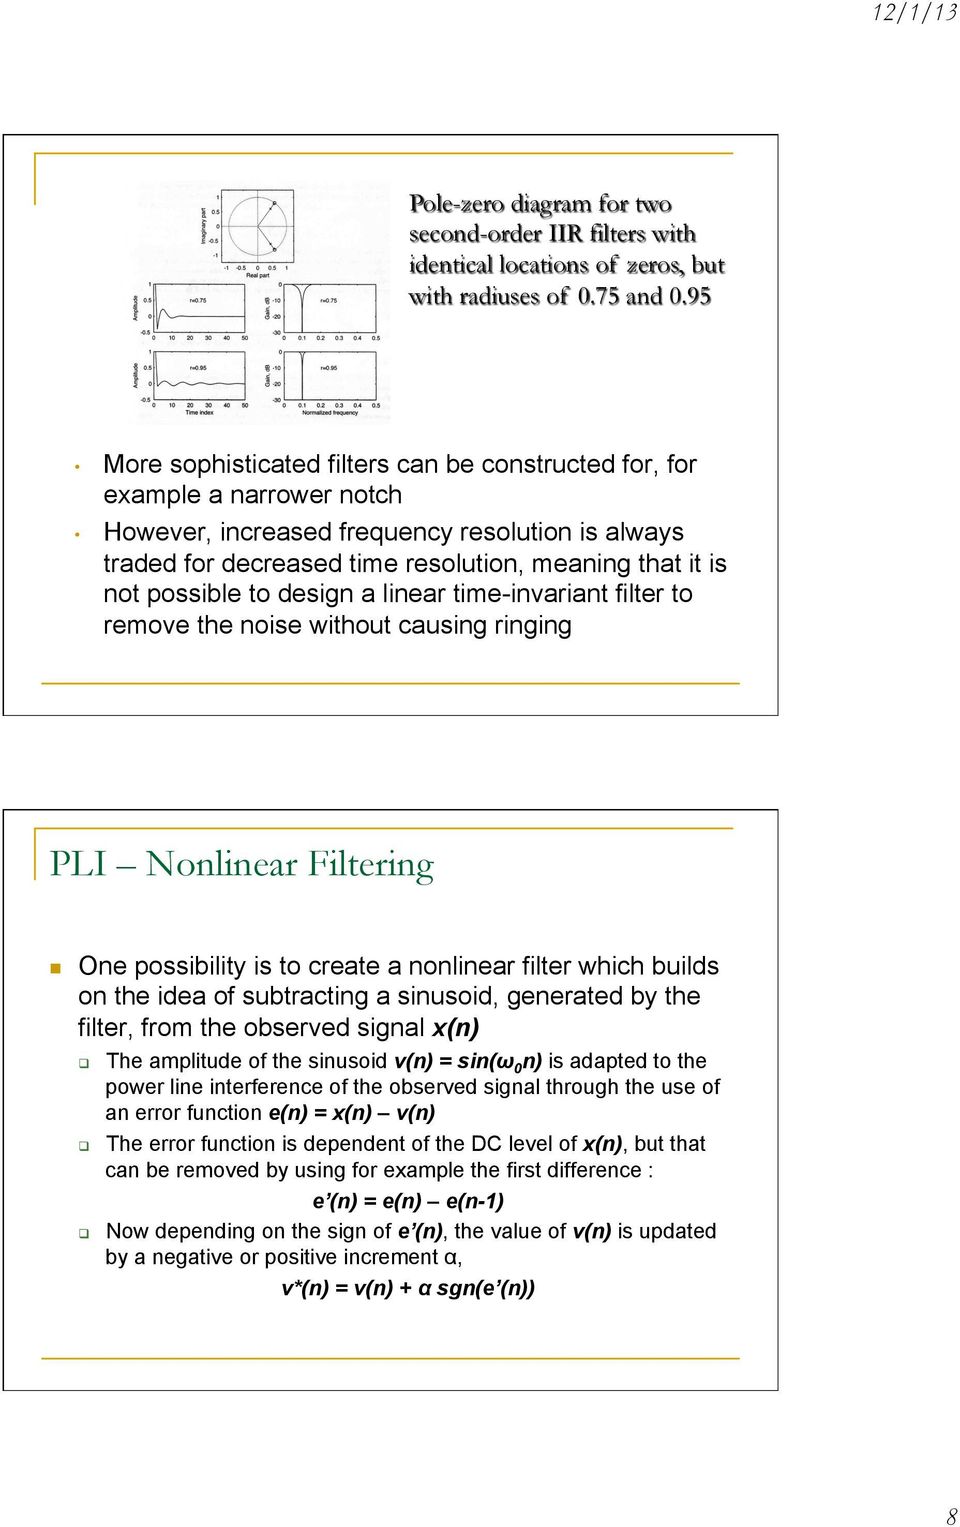 possible to design a linear time-invariant filter to remove the noise without causing ringing PLI Nonlinear Filtering One possibility is to create a nonlinear filter which builds on the idea of